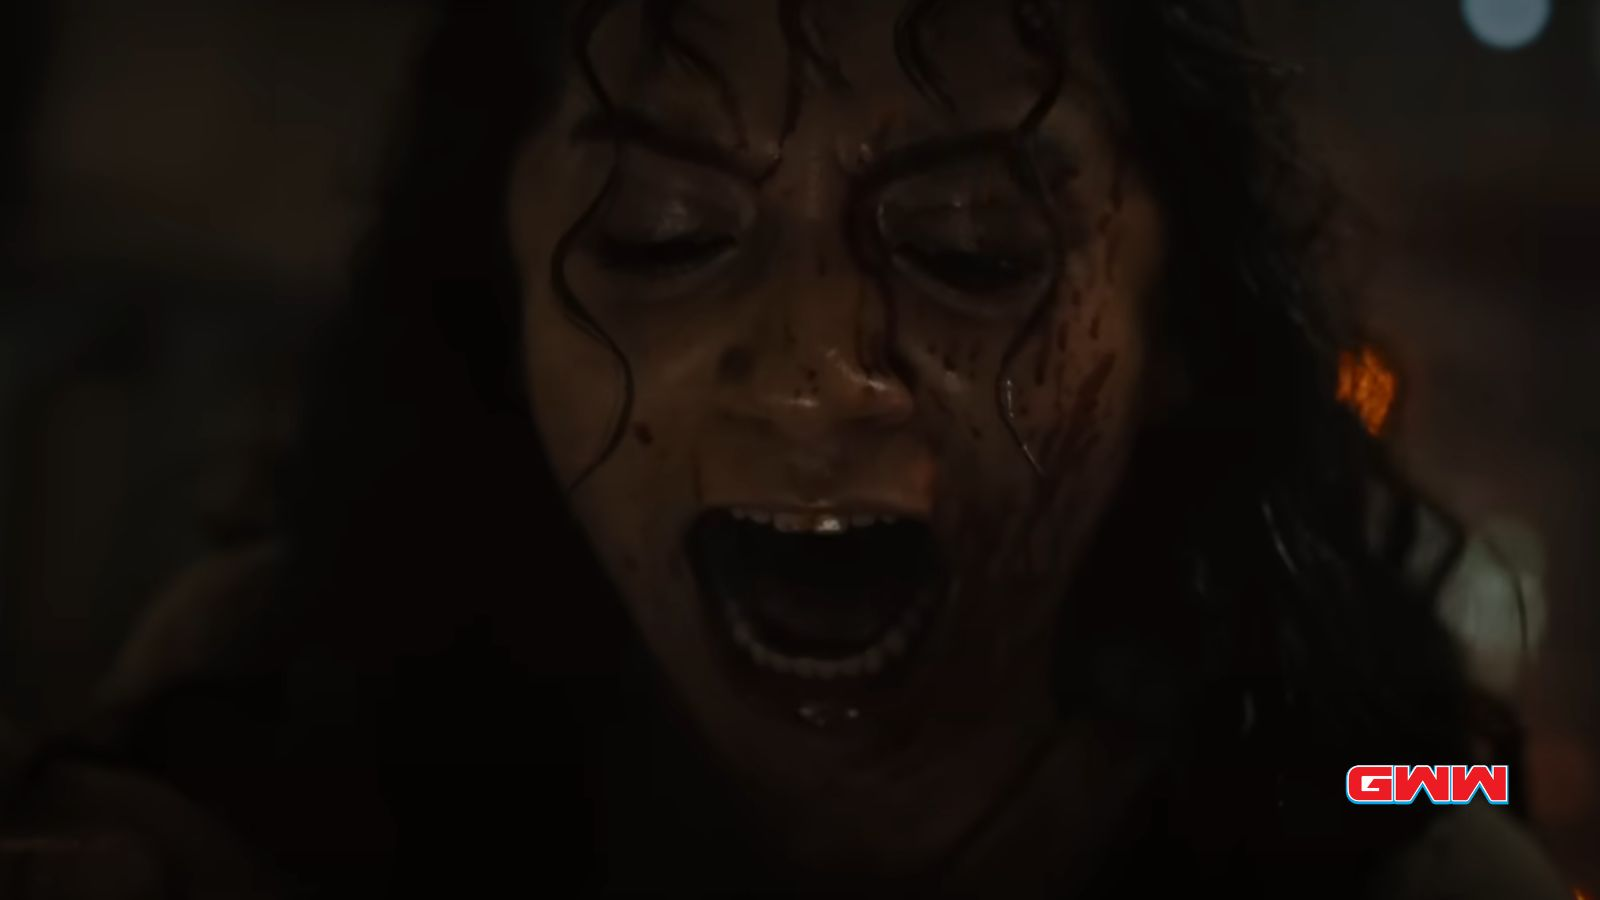 Kay screaming with a blood-covered face in a dark scene.